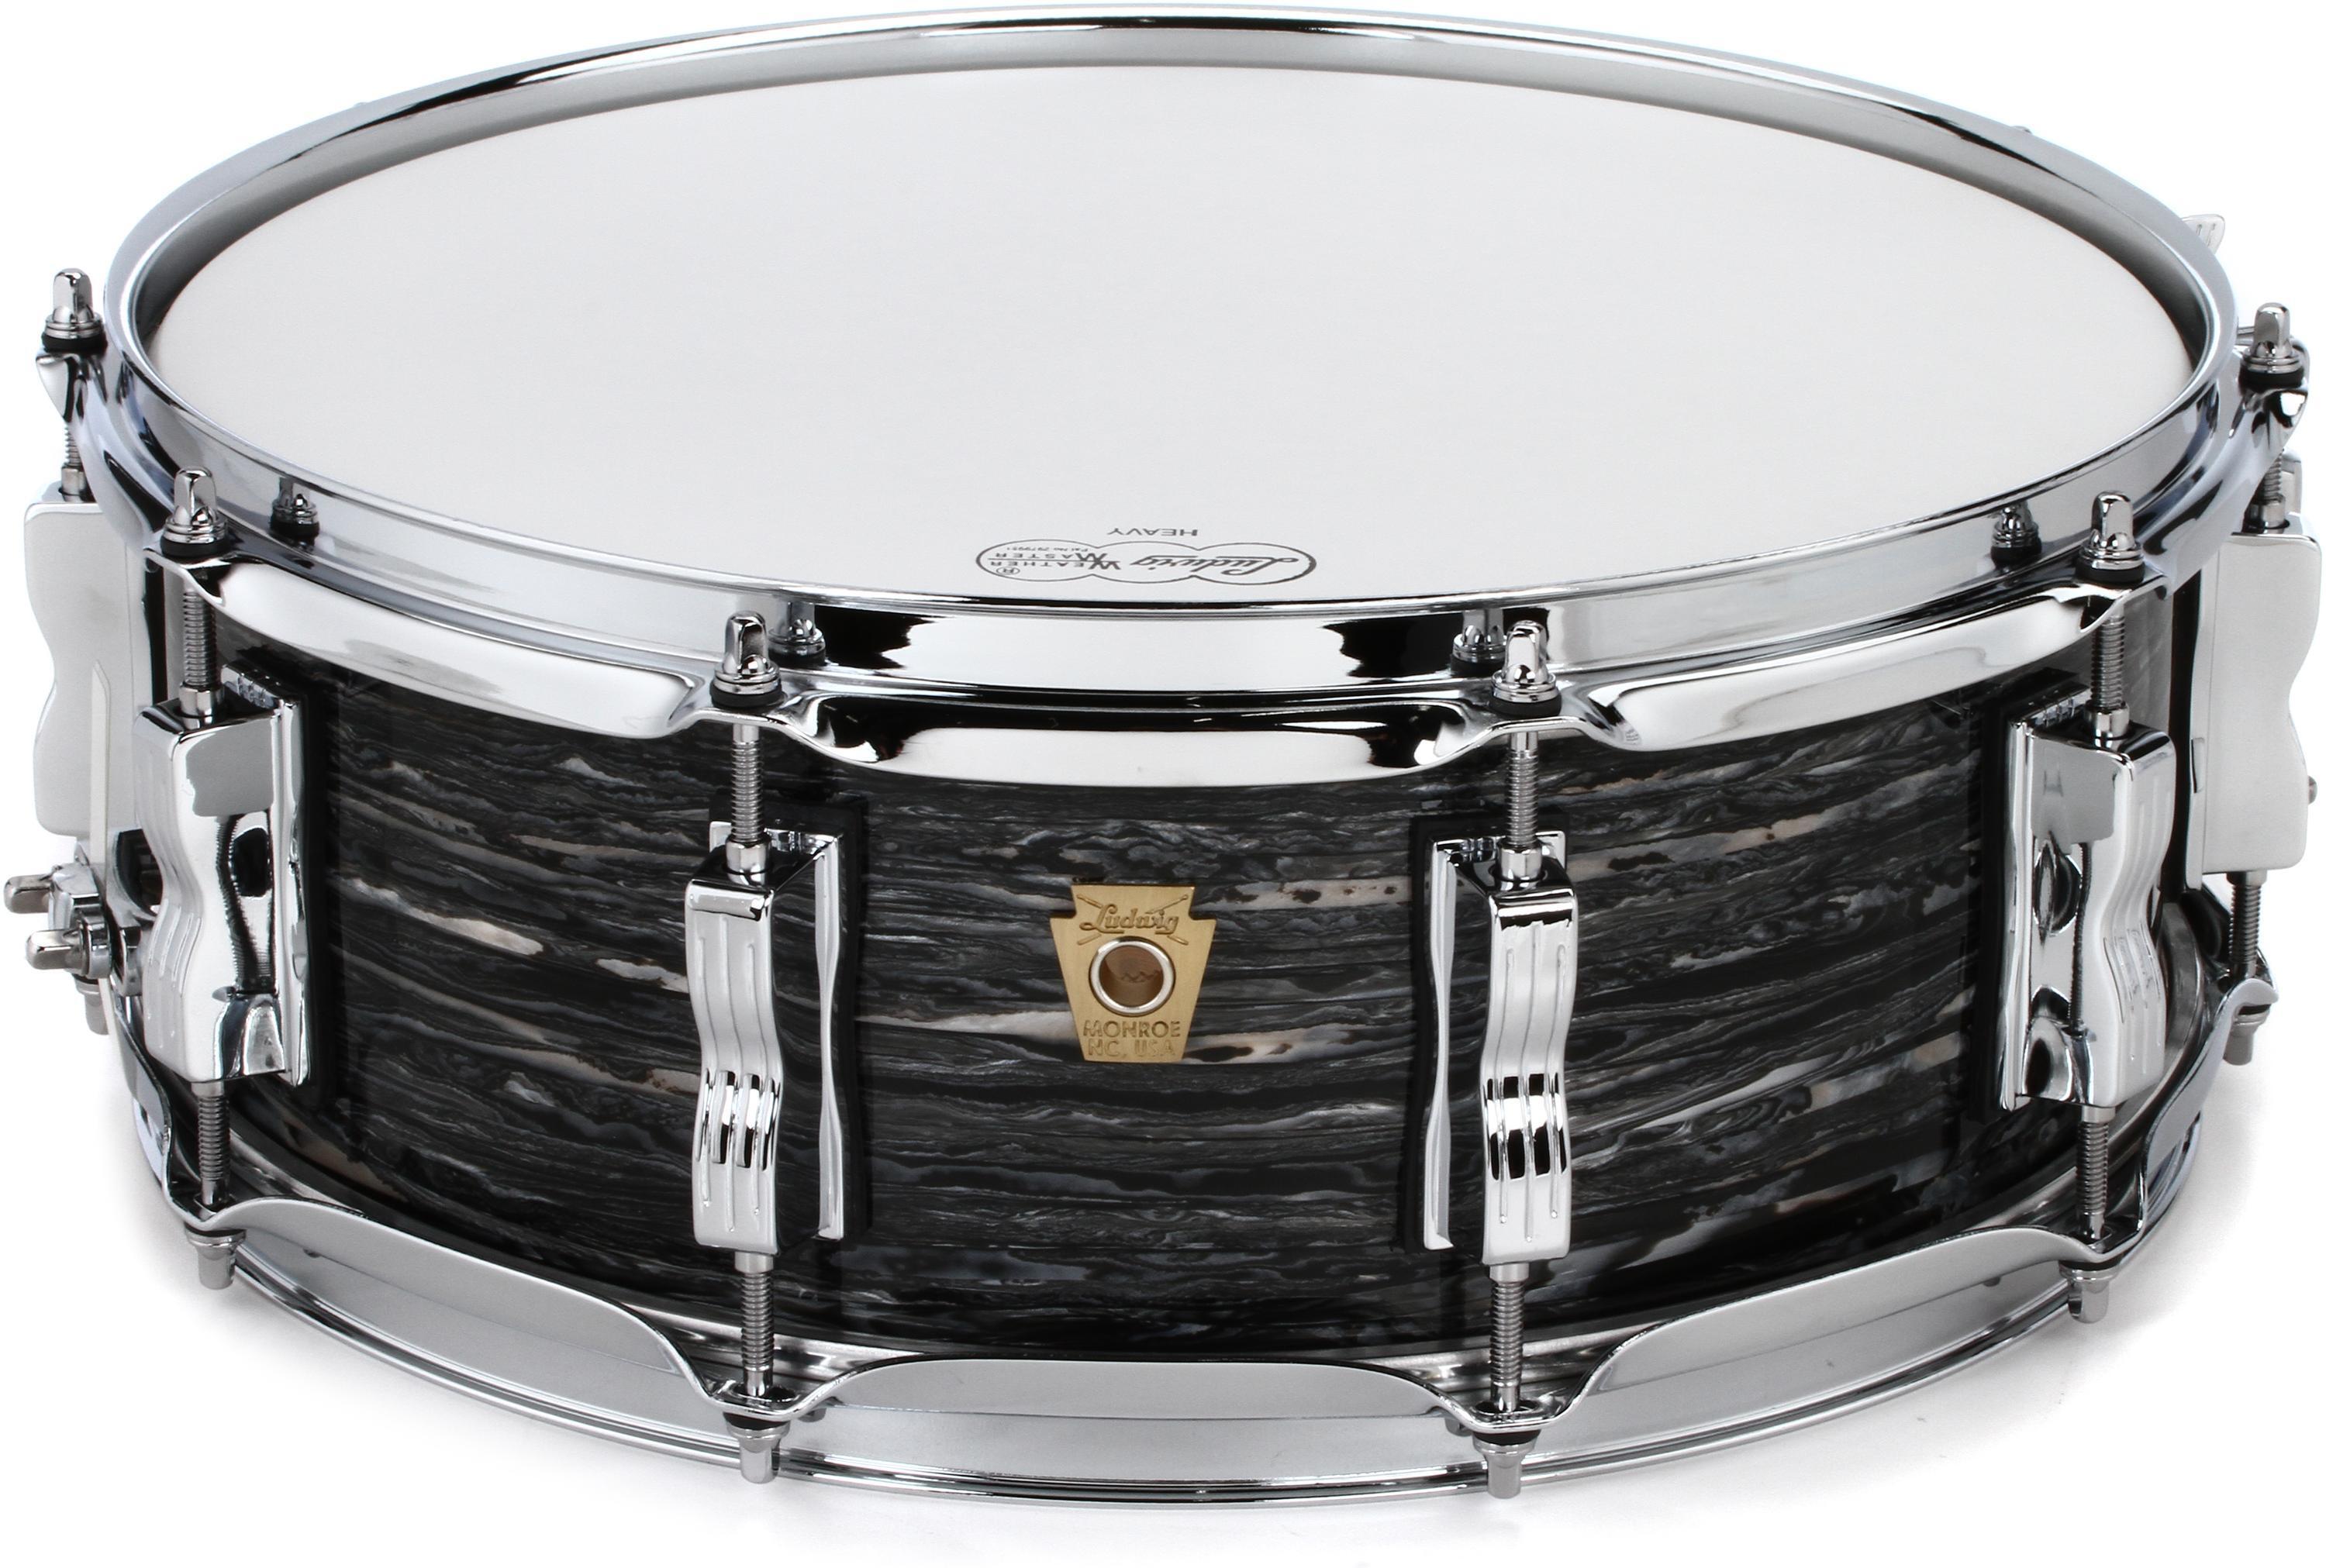 Ludwig Classic Maple Snare Drum - 5 x 14 inch - Vintage Black